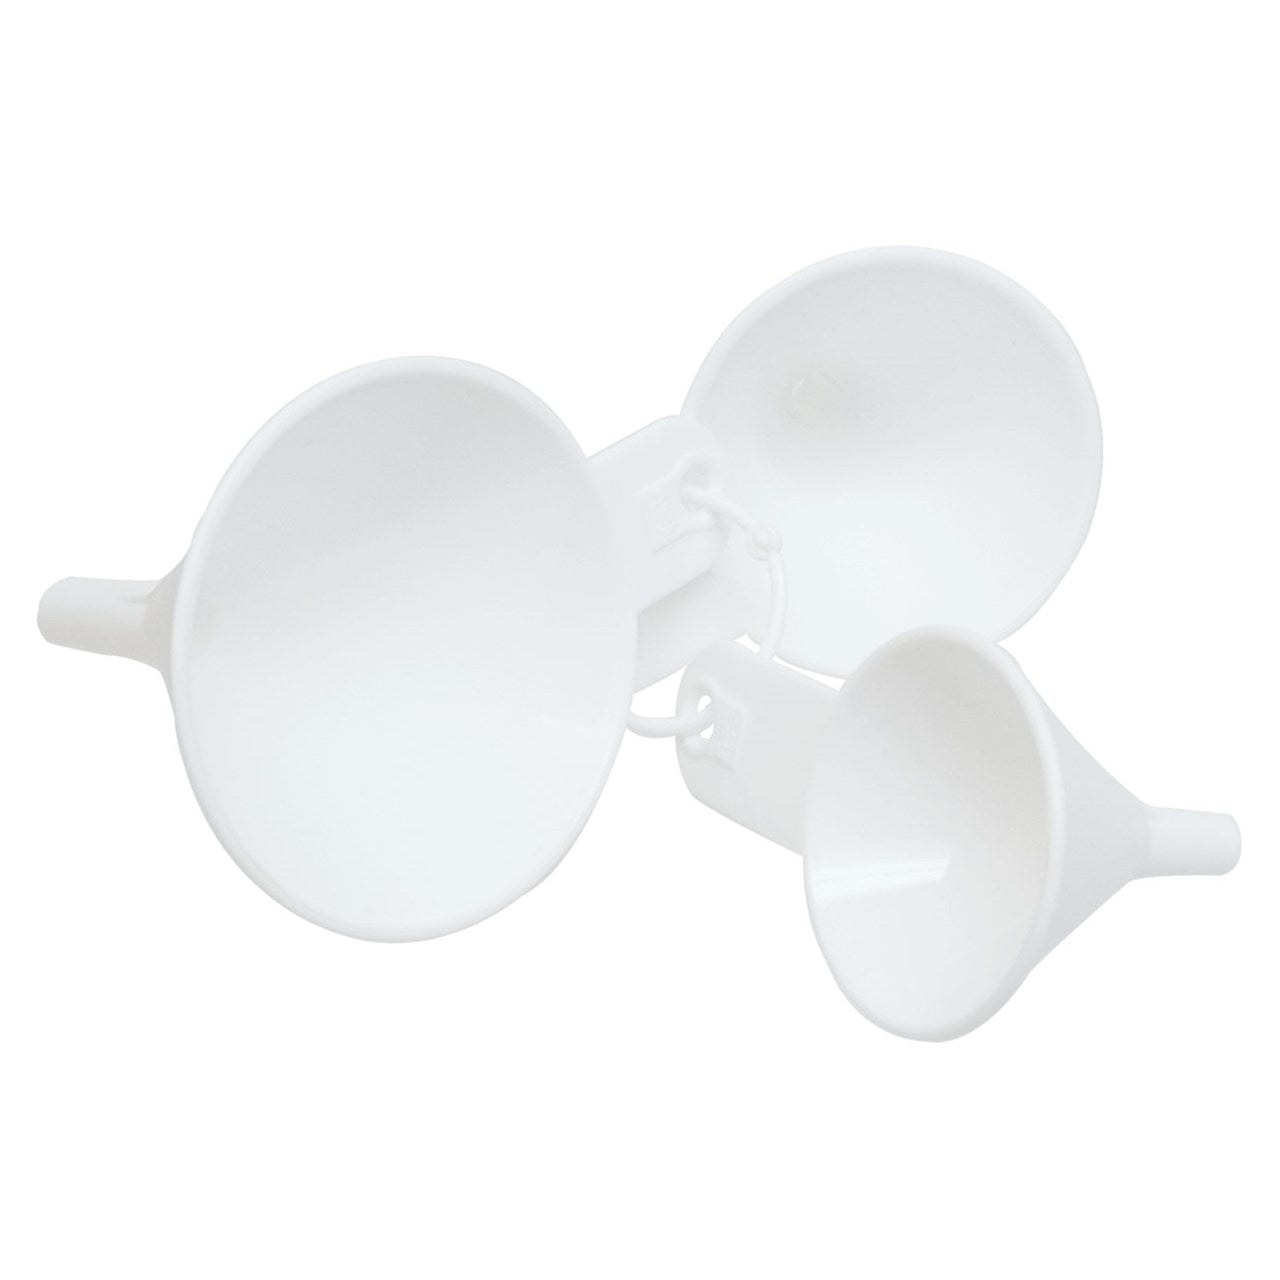 Set of 3 white funnels of small, medium and large sizes